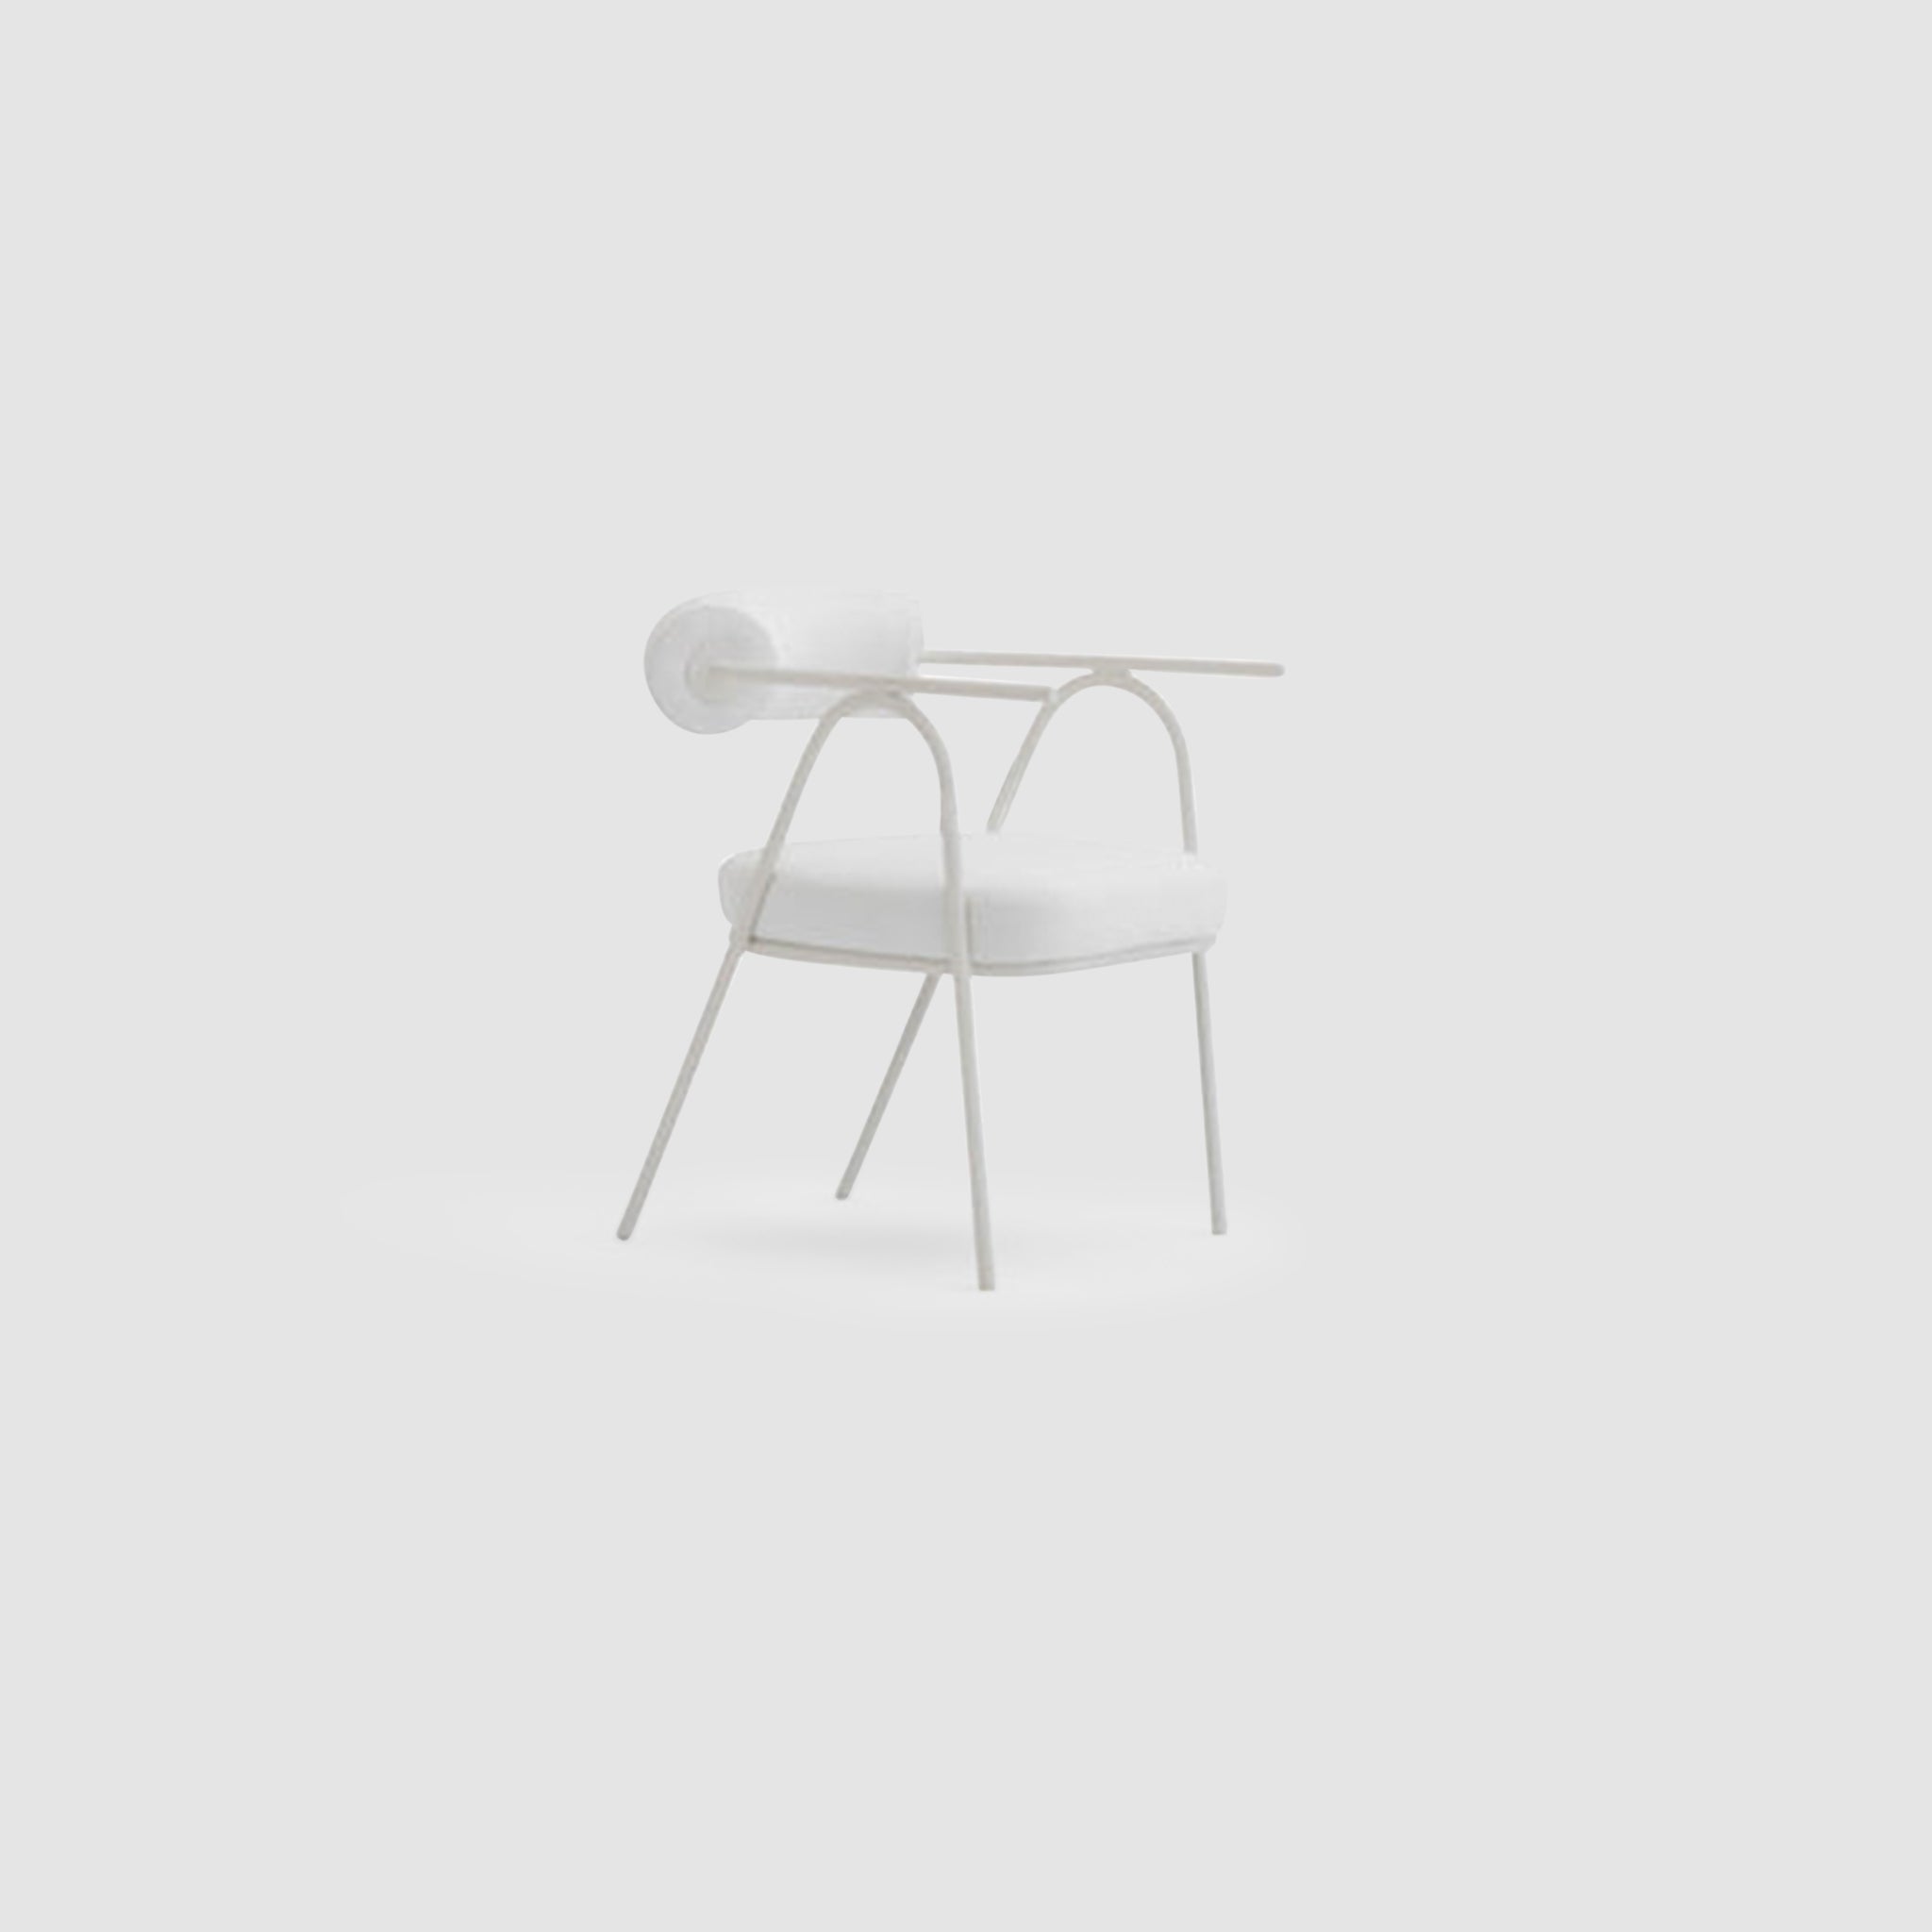 The Wanda Dining Chair featuring a modern minimalist design with a white metal frame, padded seat, and cylindrical backrest, offering a stylish and comfortable seating option.